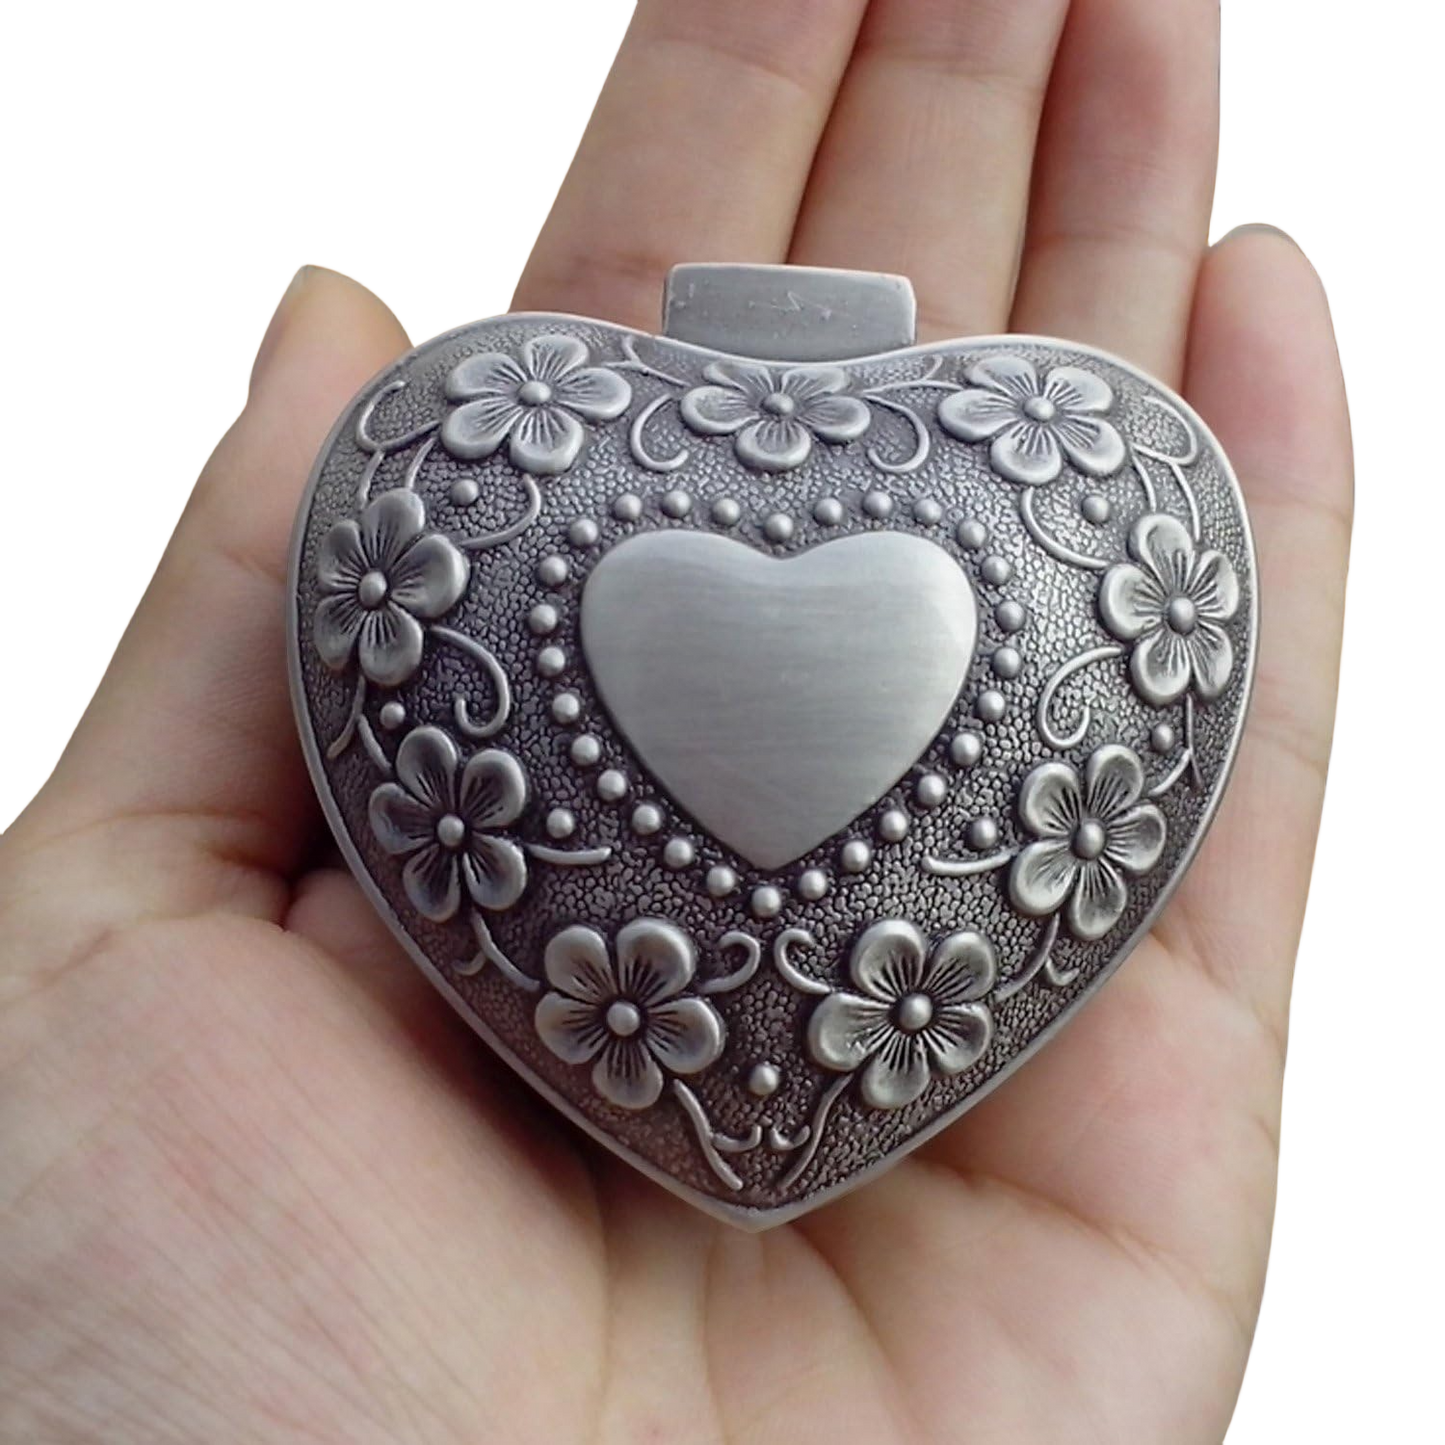 L&L Vintage Antique Heart Shape Jewelry Box Ring Small Trinket Storage Organizer Chest Christmas Gift, Silver